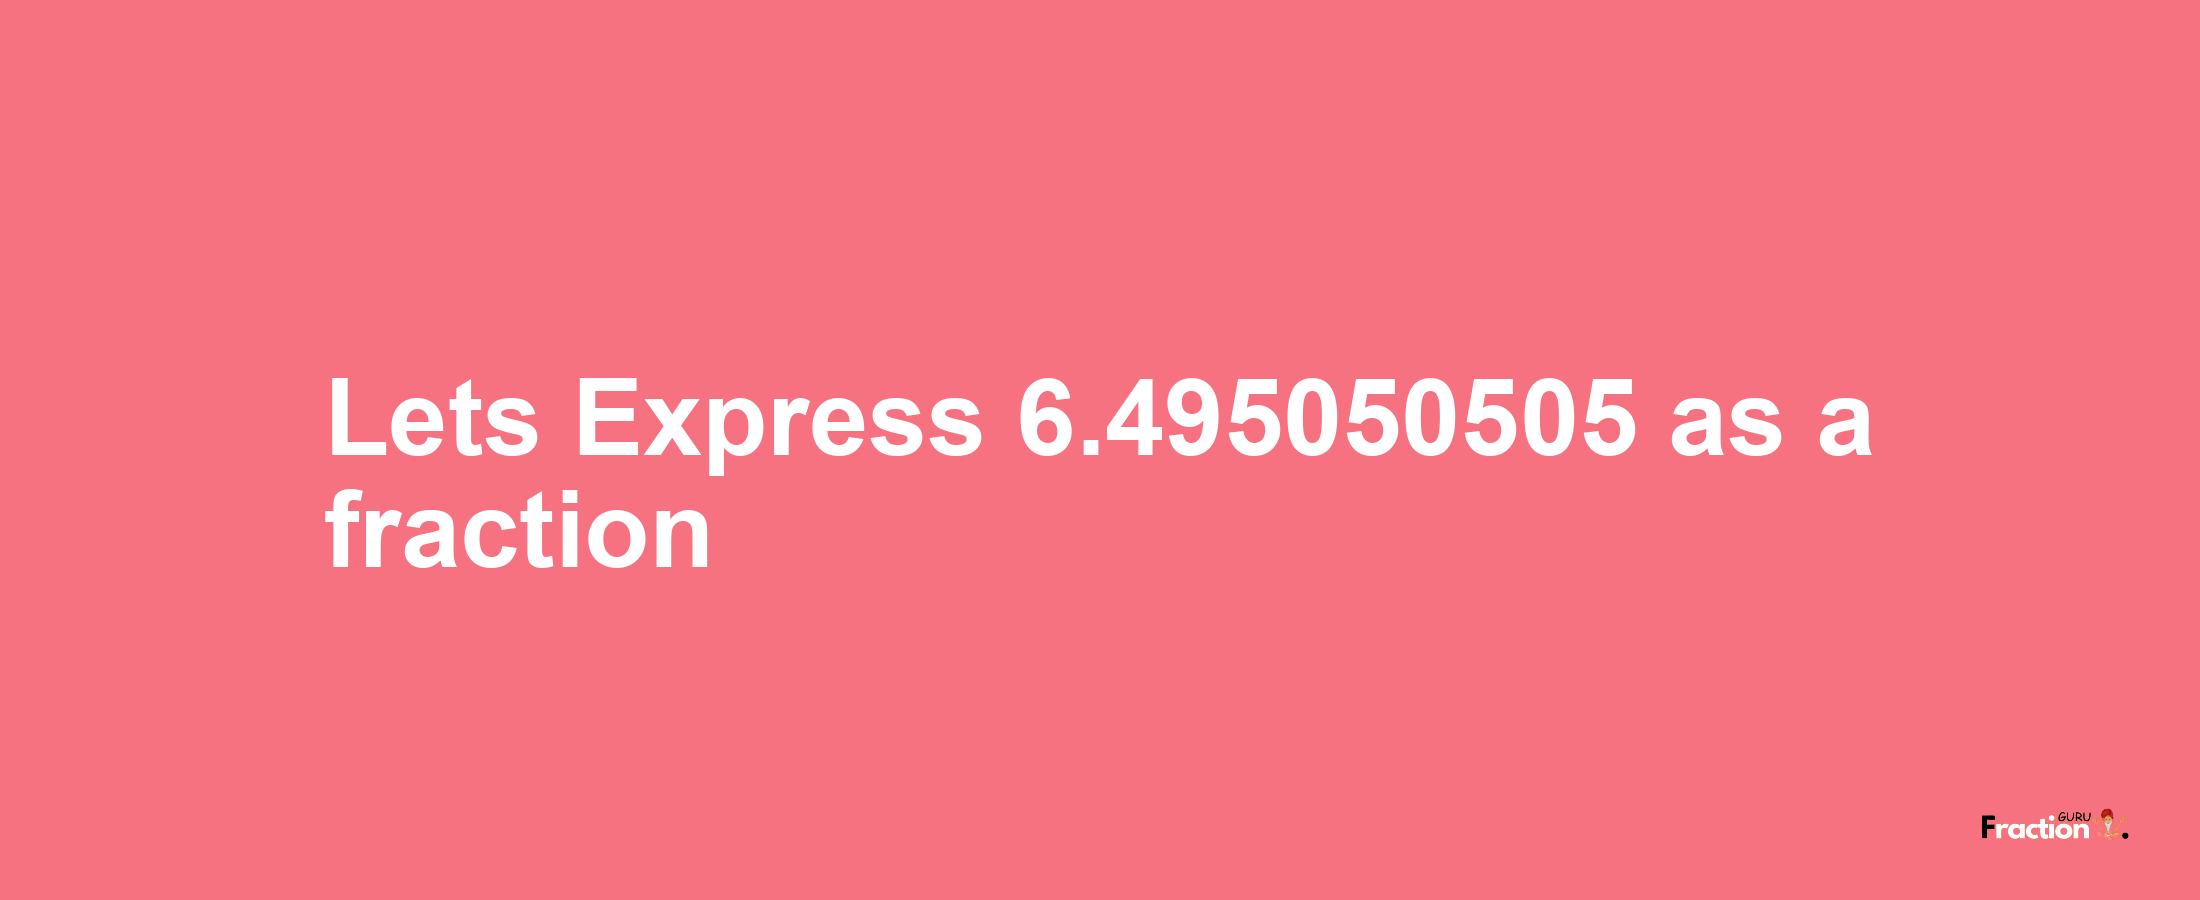 Lets Express 6.495050505 as afraction